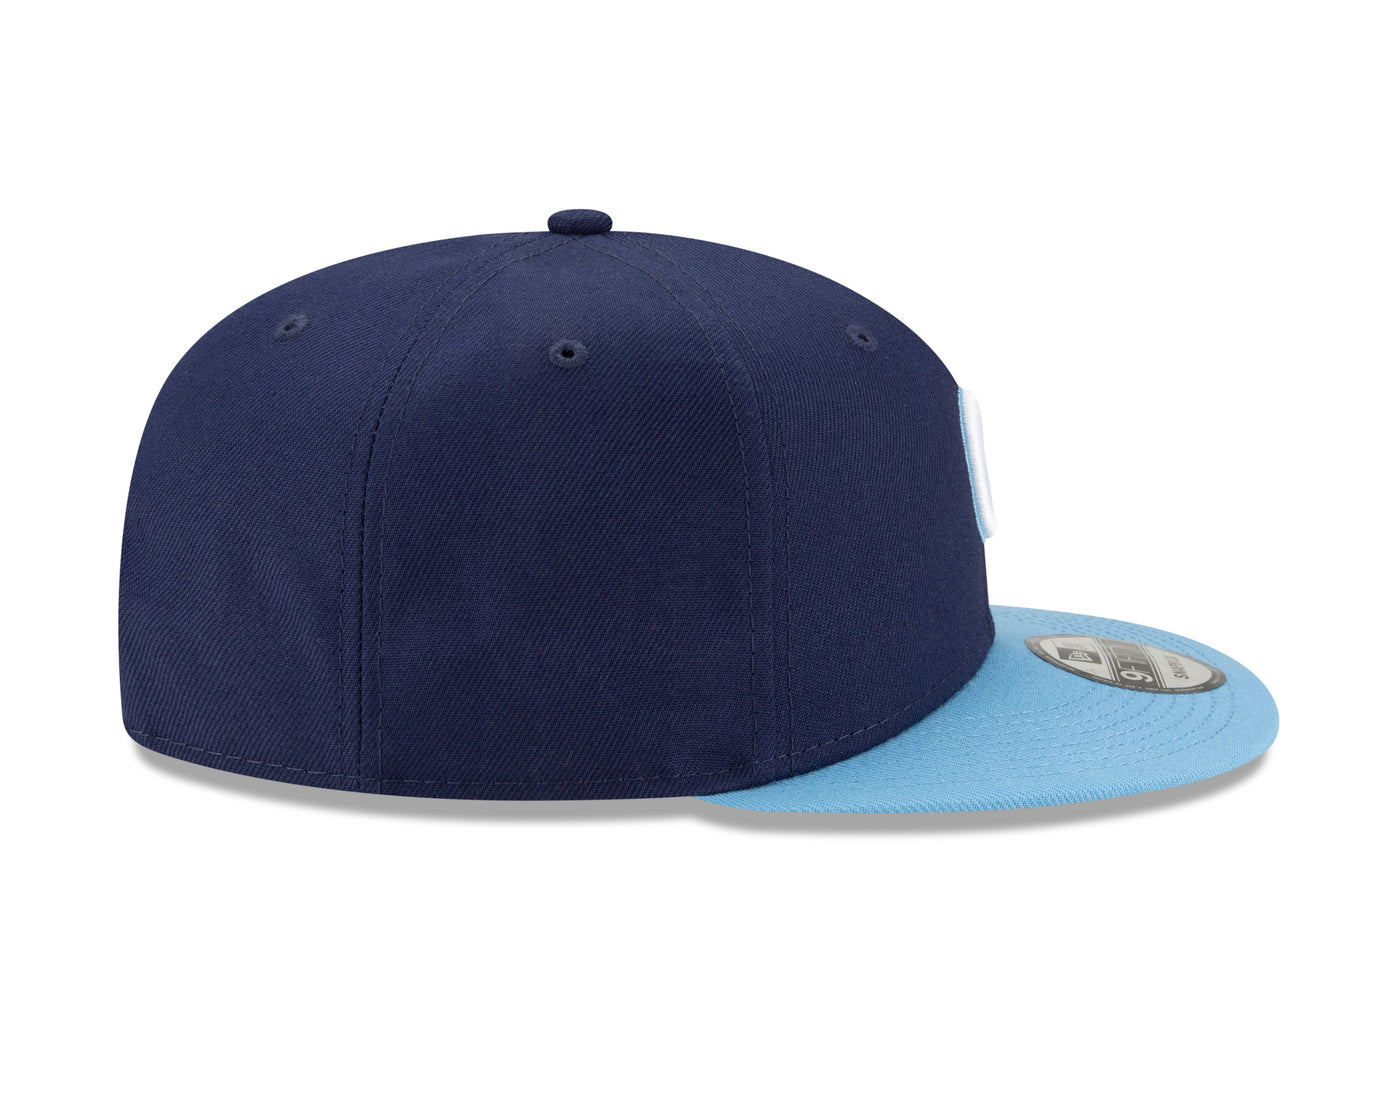 CITY CONNECT CHICAGO CUBS YOUTH 9FIFTY CAP - Ivy Shop